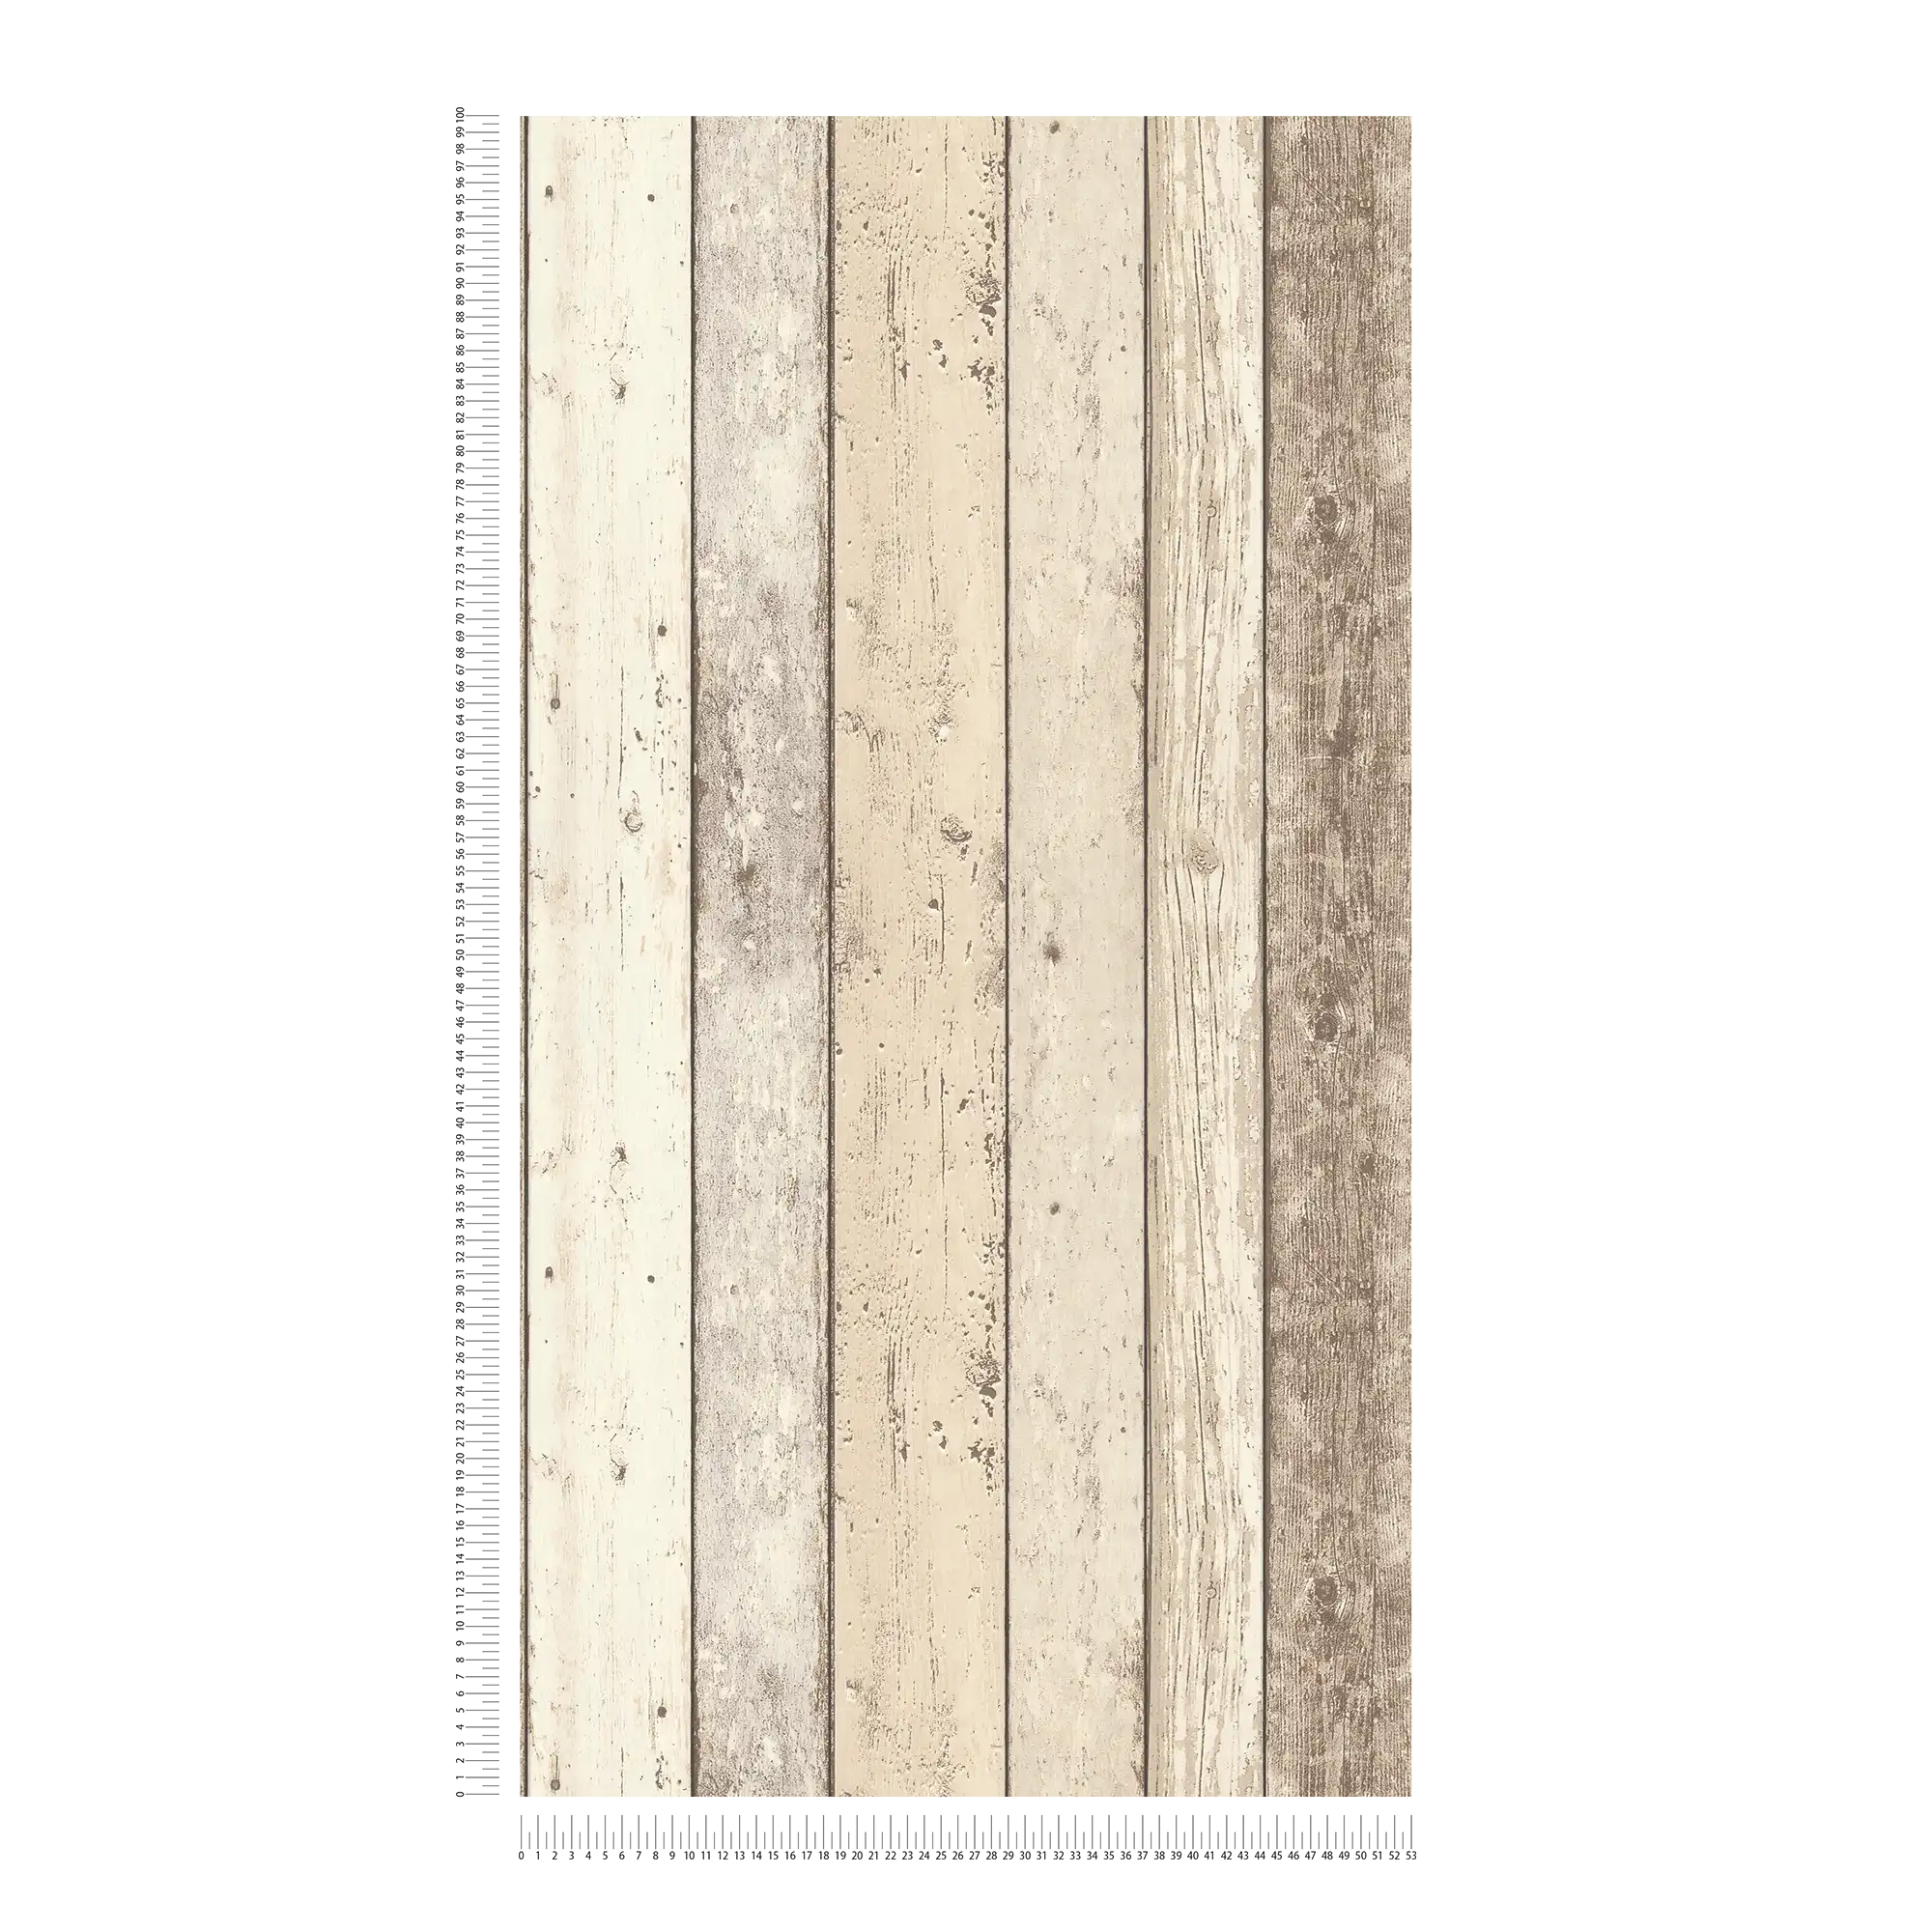             Rustic boards wallpaper with wooden boards in used look - beige, brown, white
        